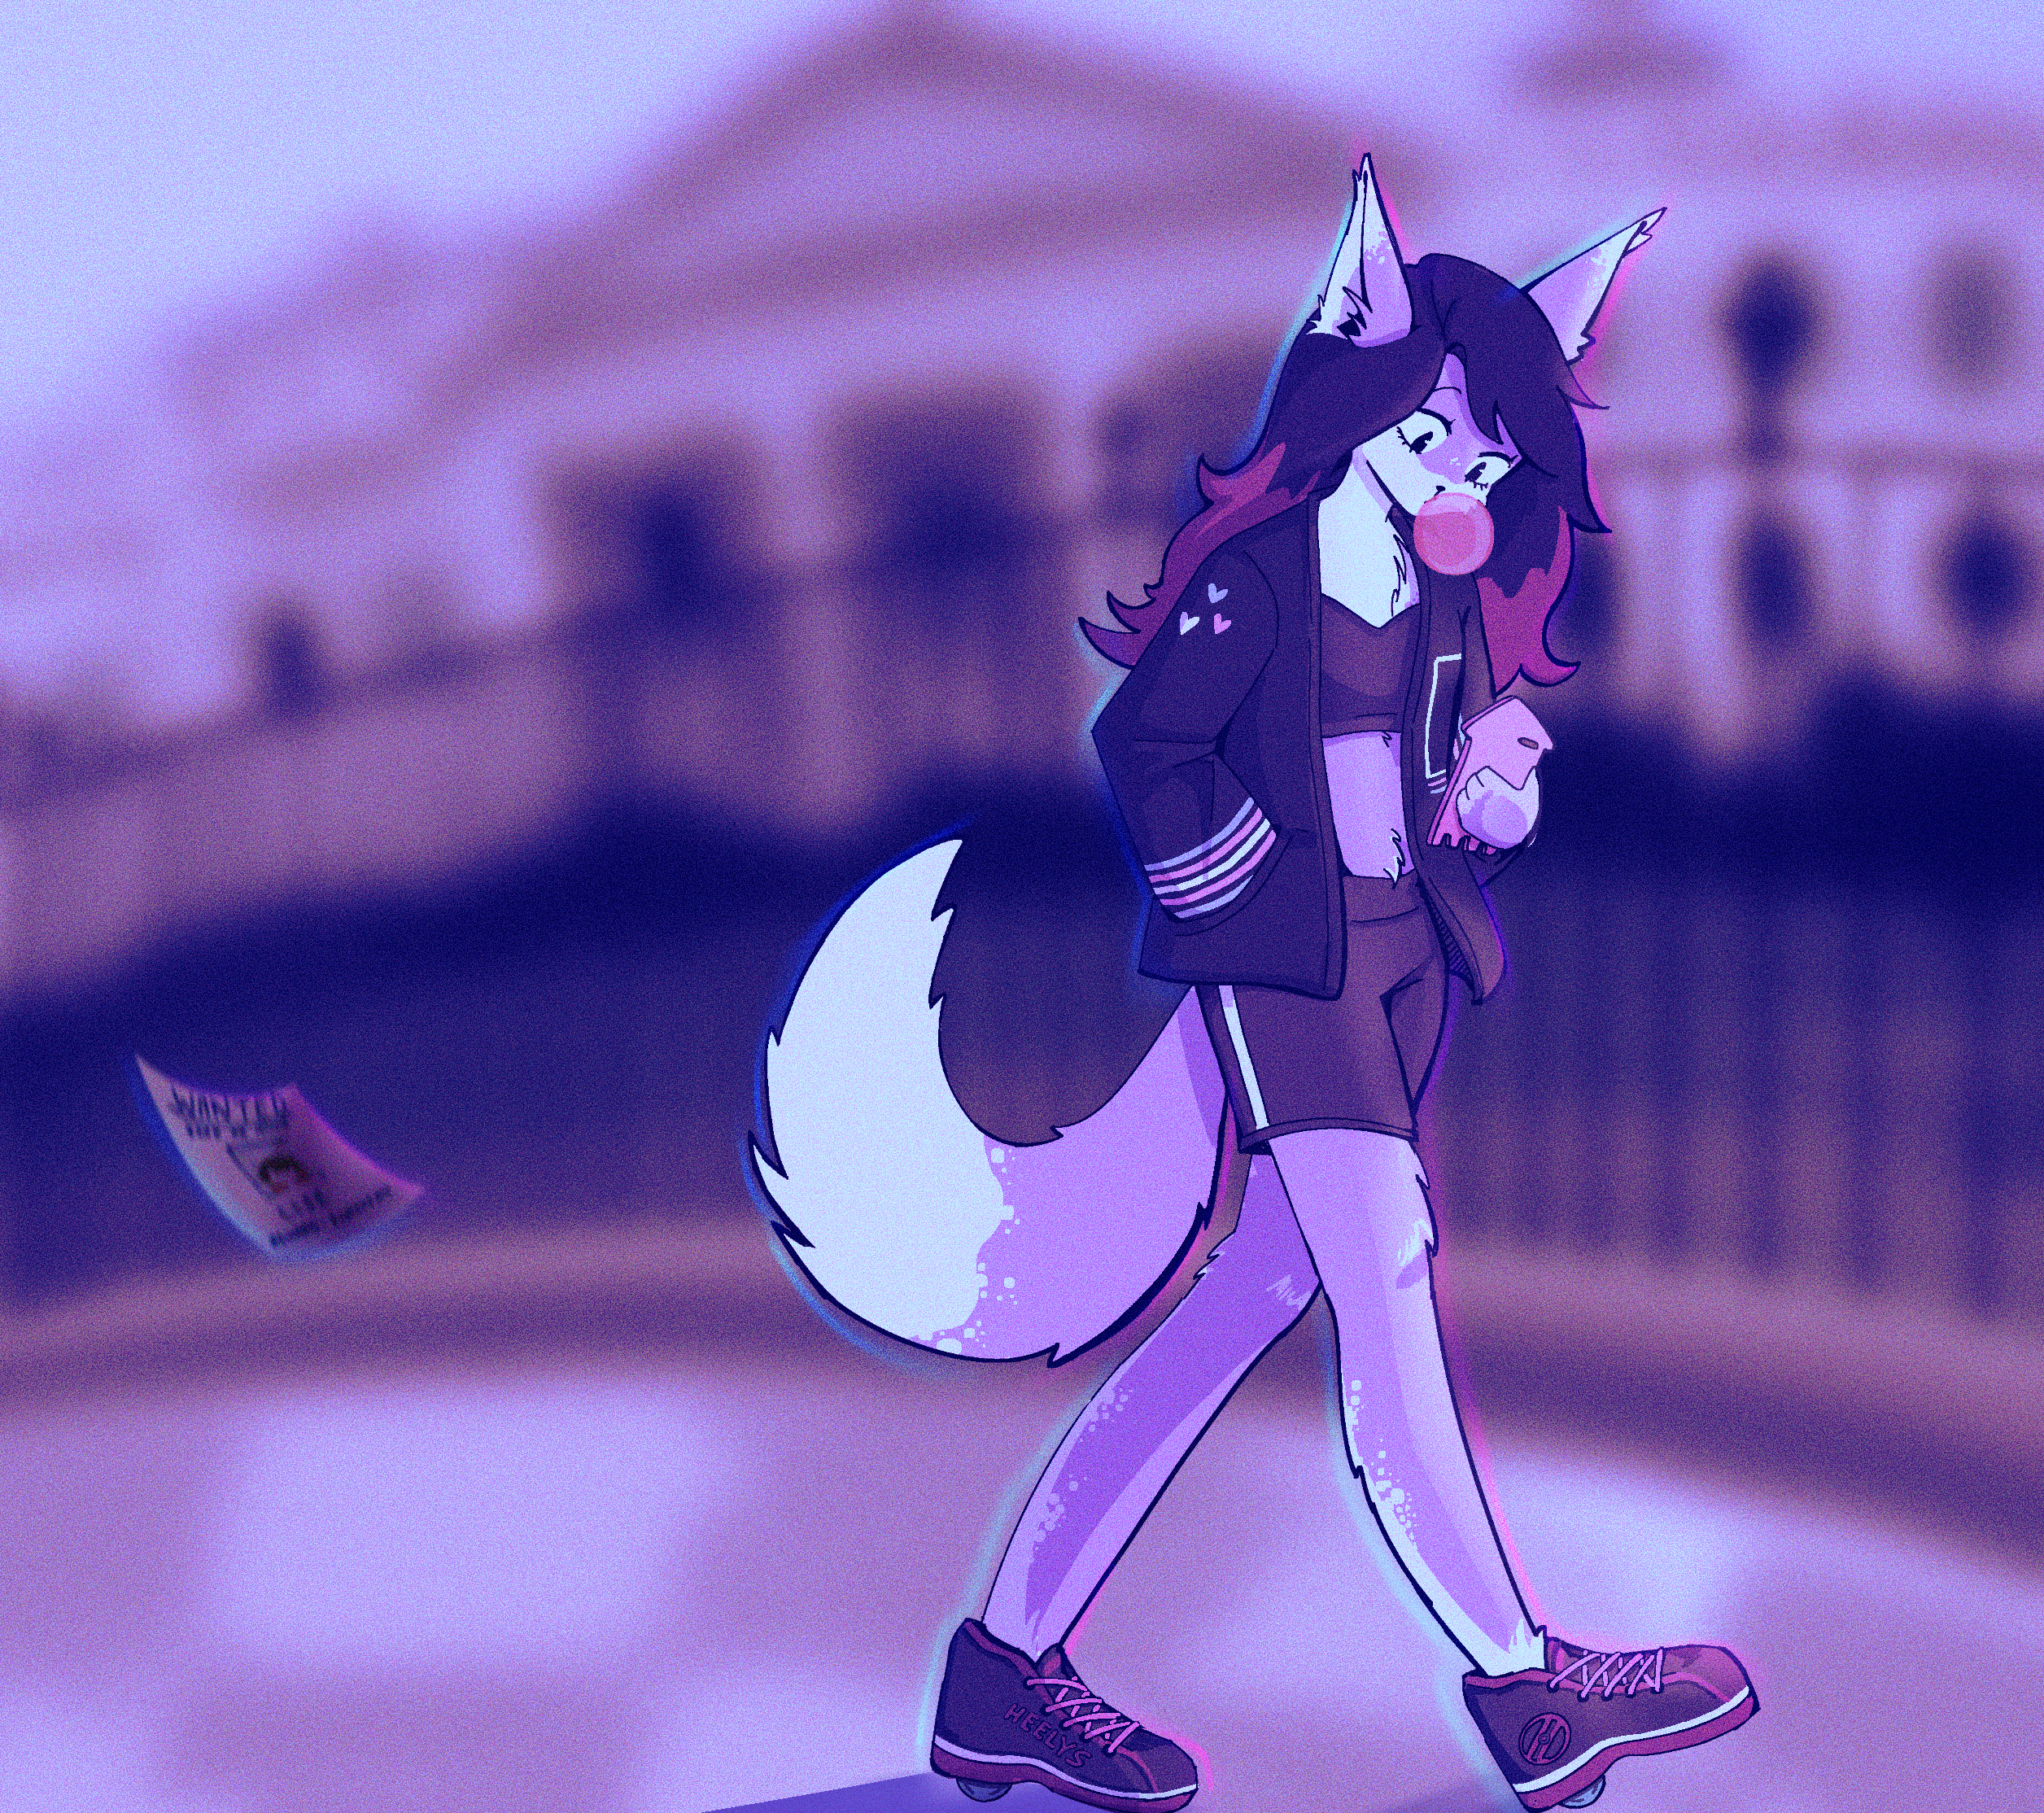 my fursona strolling past the white house in a pair of heely's, with a wanted poster for her arrest flying by in the wind. the entire image has a strong purple filter to it, and it's grainy like an old vhs tape